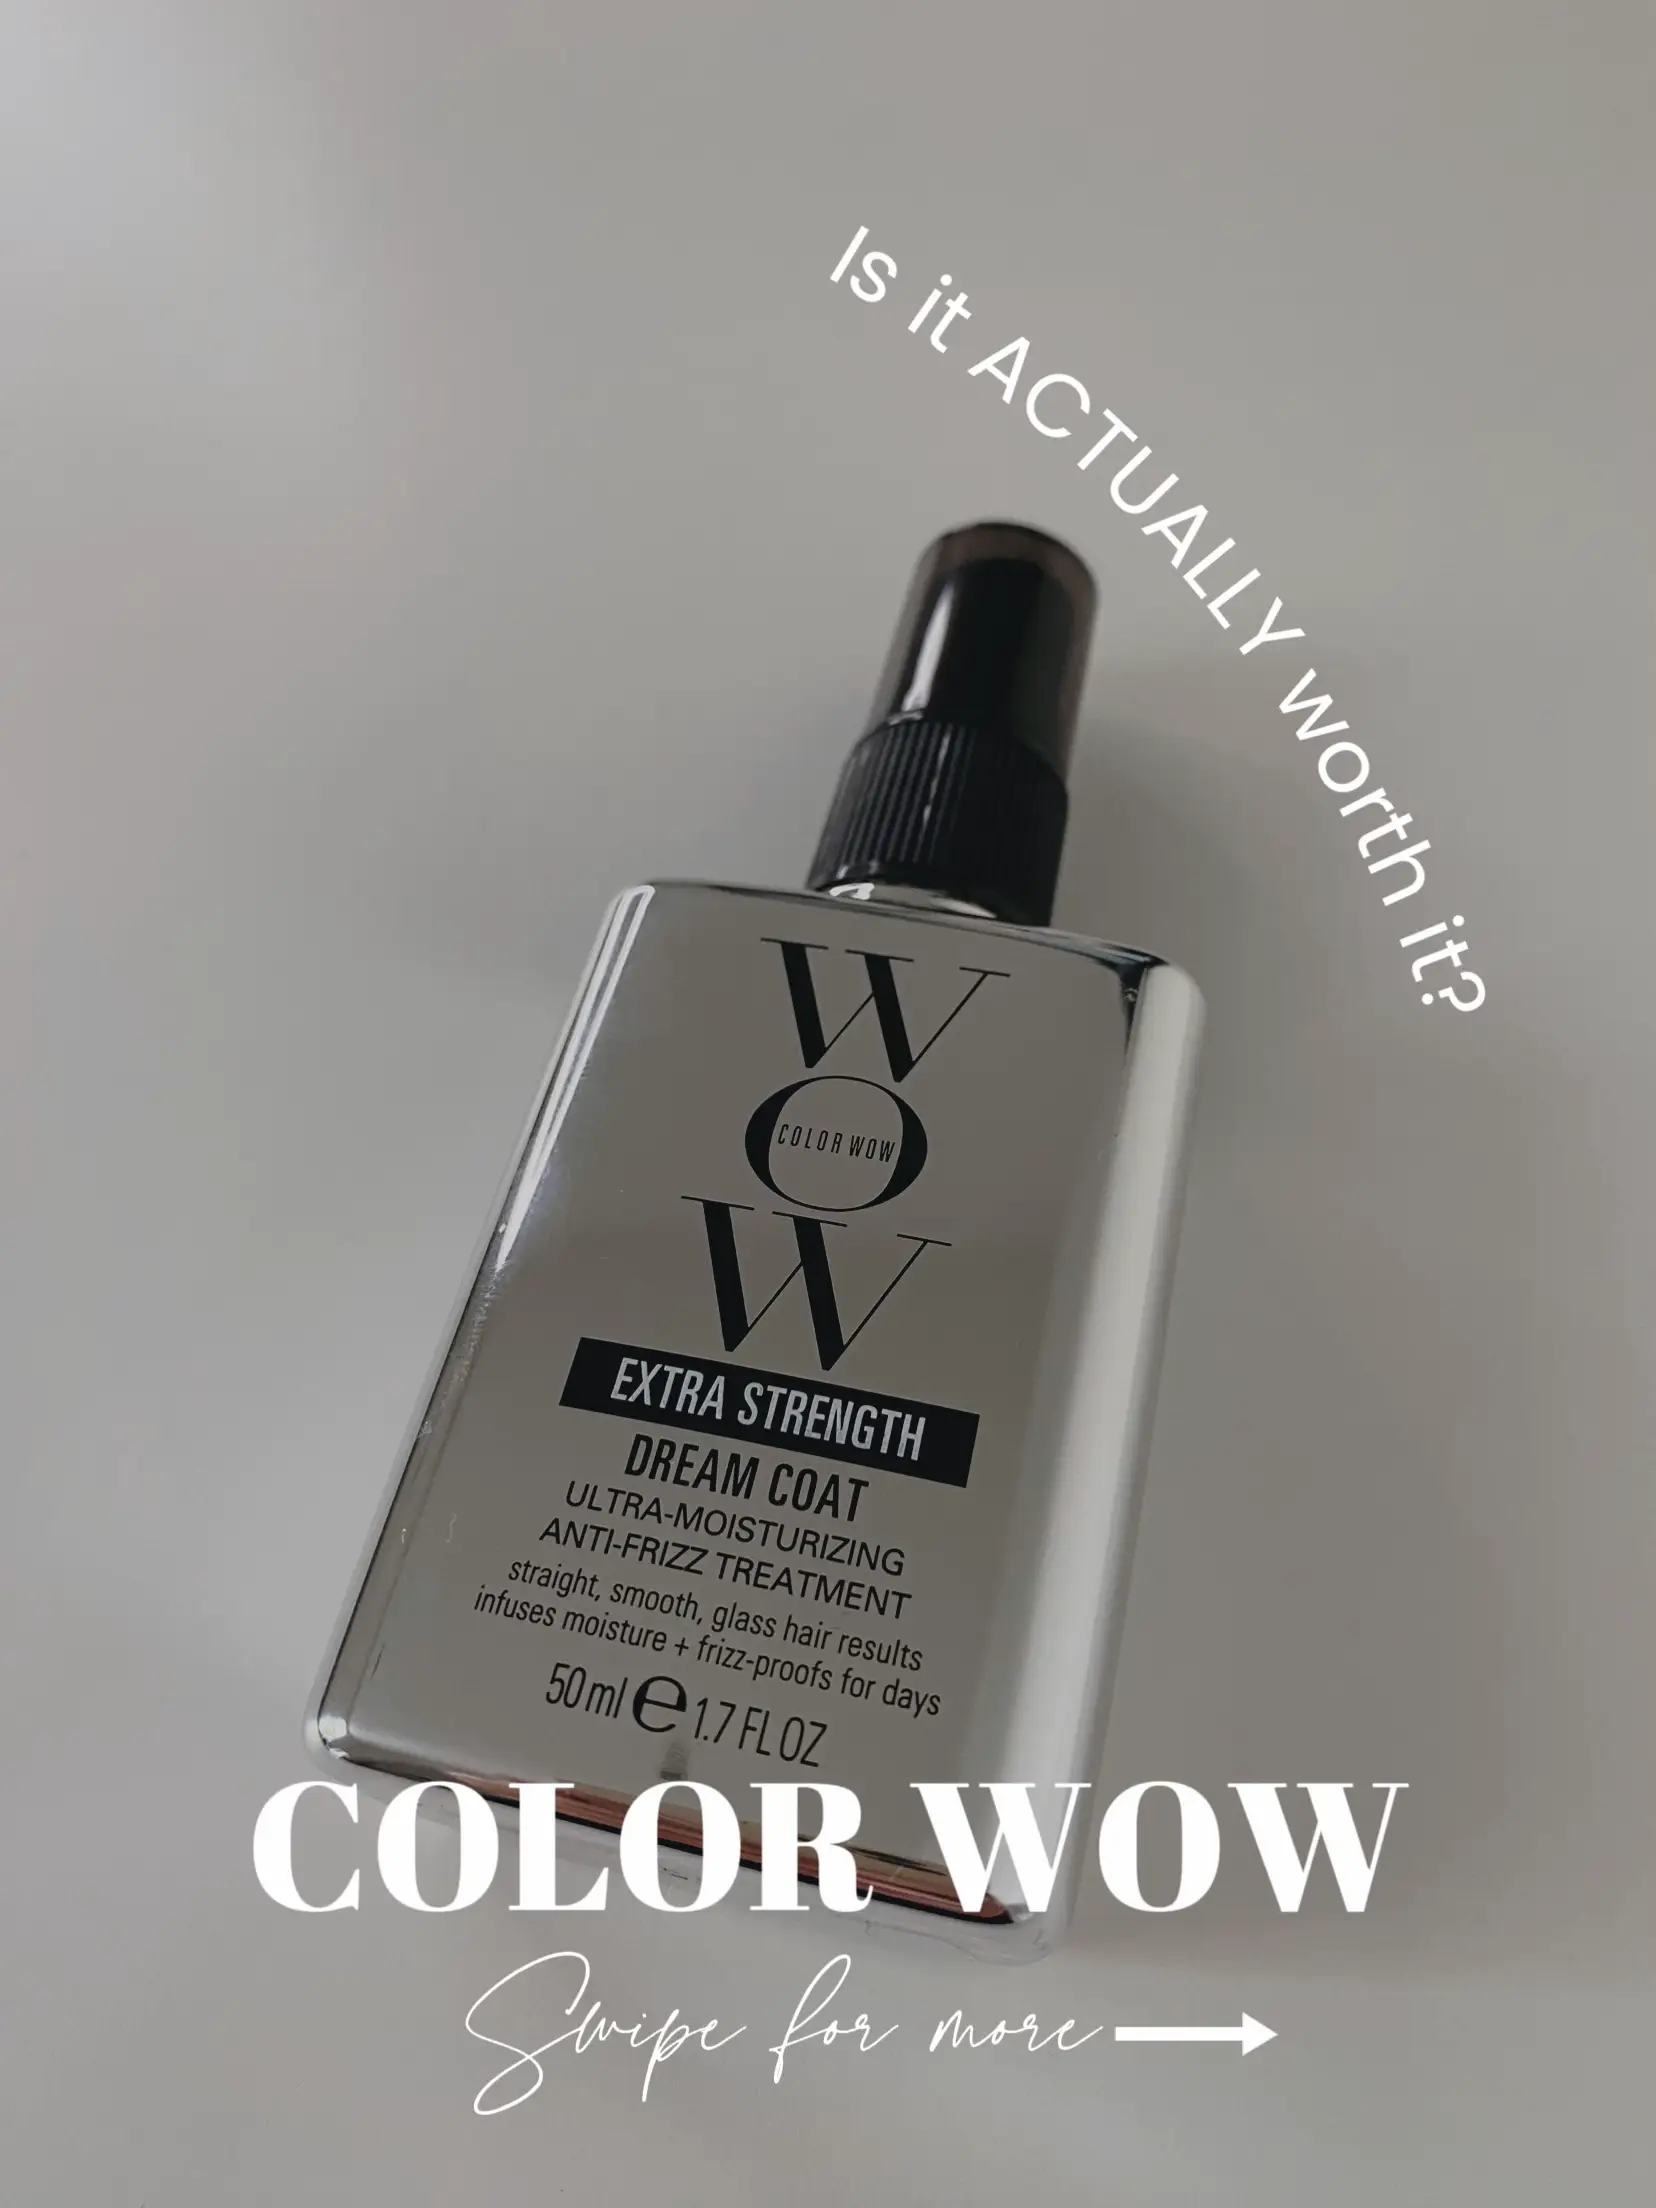 I Tried Color Wow's Viral Dream Coat Spray and It Gave Me Glassy